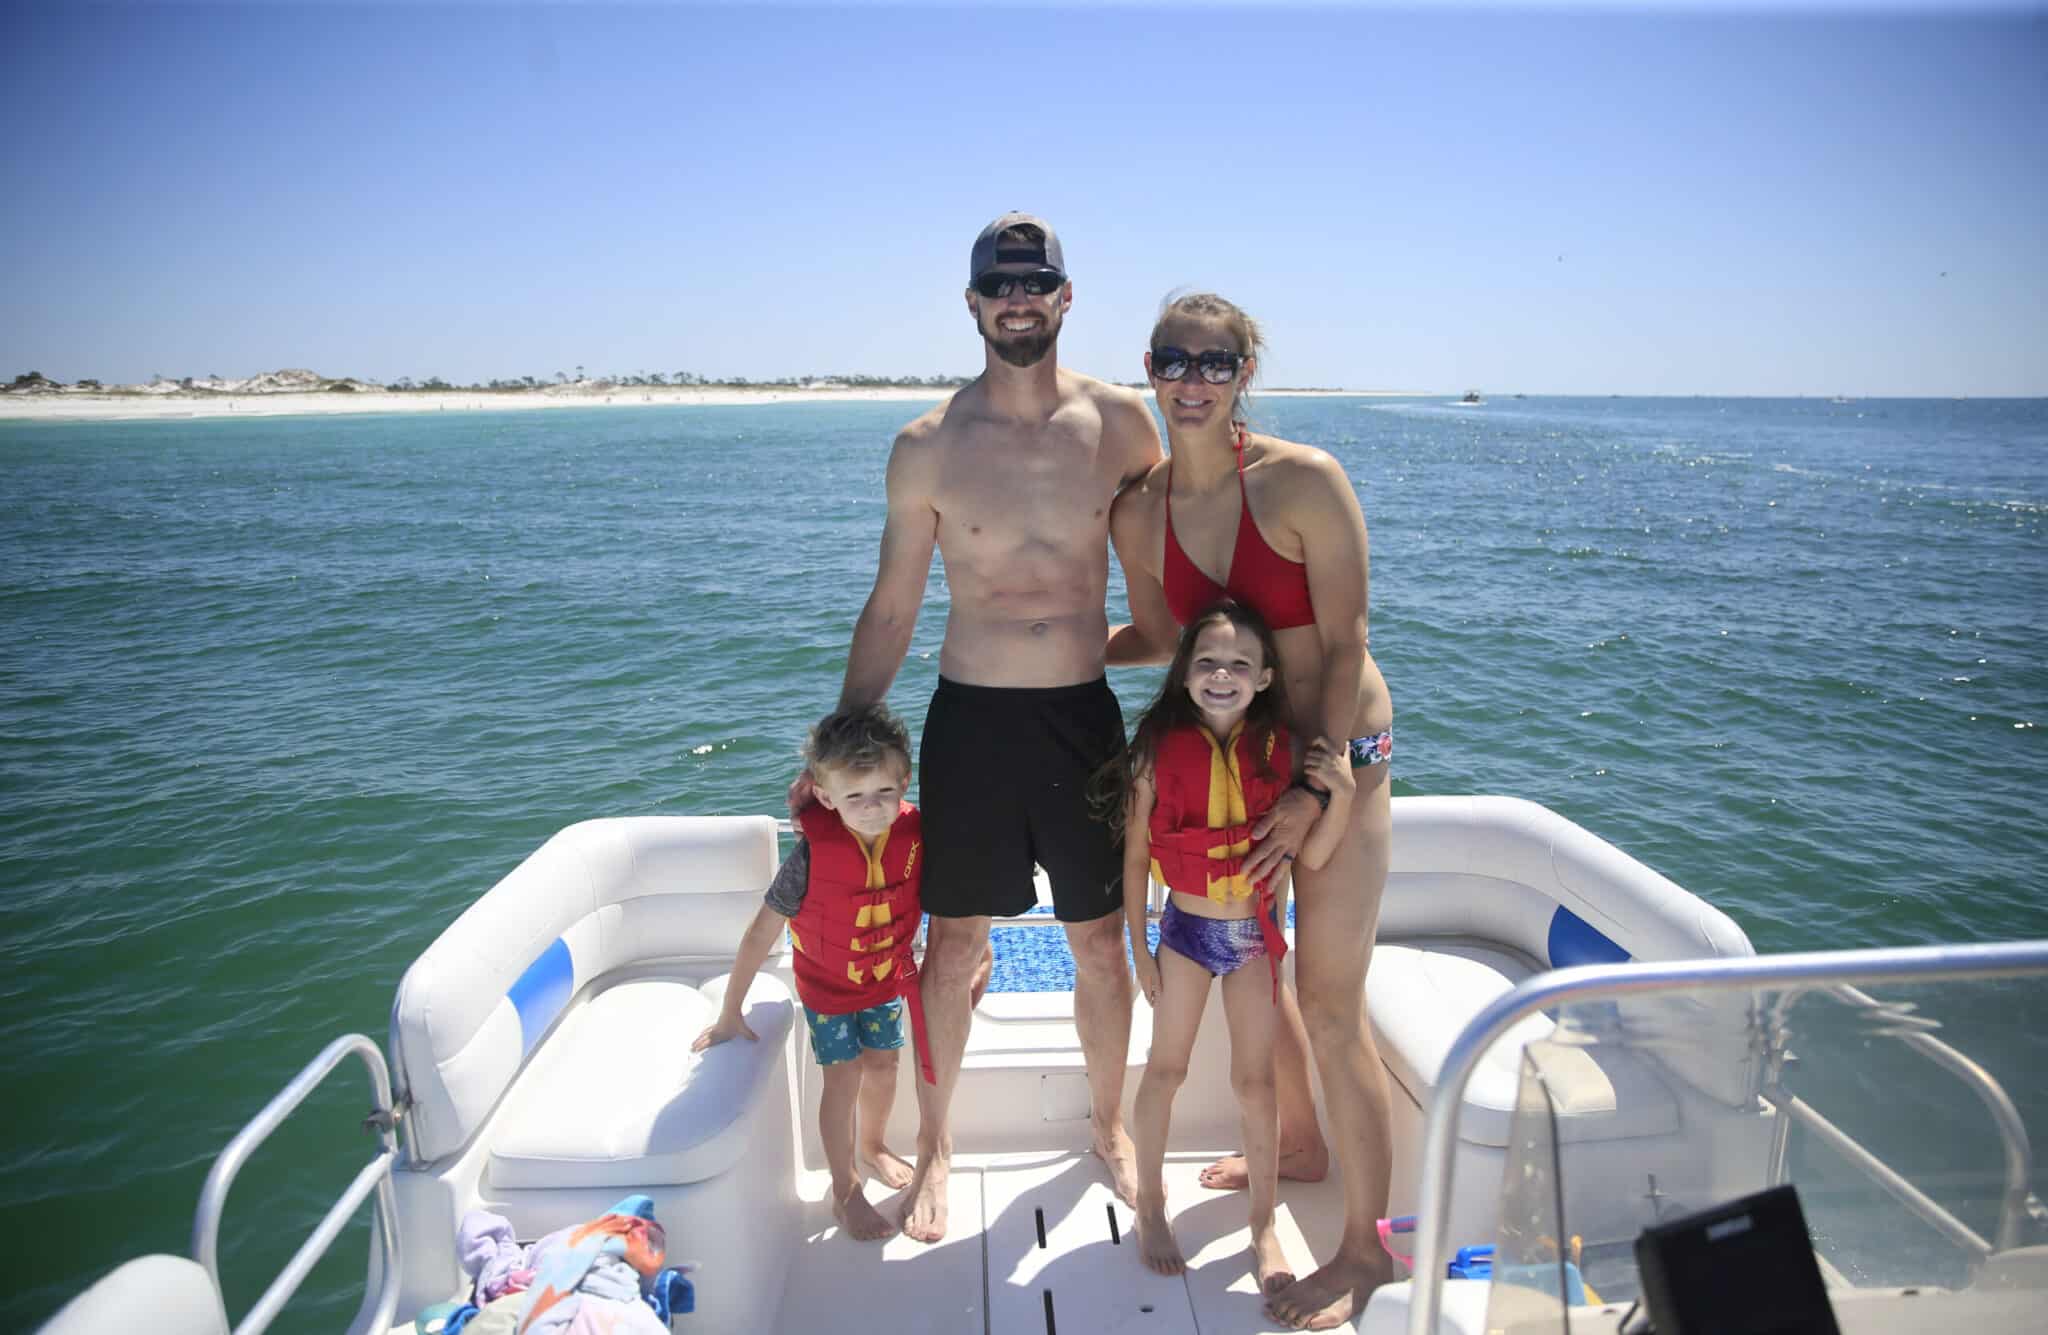 Flippin' Awesome Adventures Kid Friendly Boat Tours in the Gulf of Mexico | Panama City Beach, Florida Dolphin Tours, Snorkeling Excursions, & Boat Trips led by Captain Chris, a marine biologist